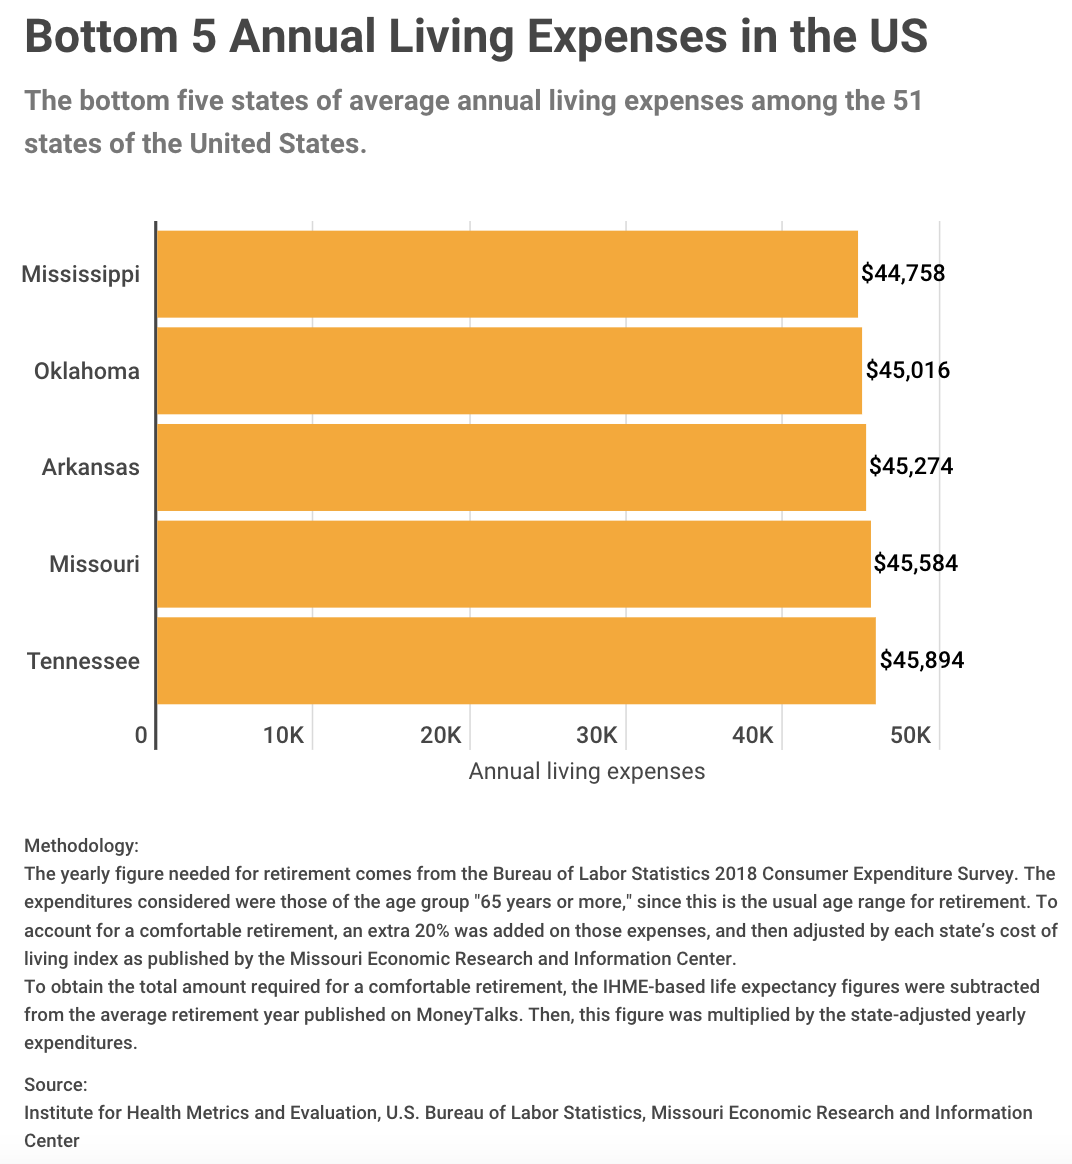 Bottom5 US states annual living expenses